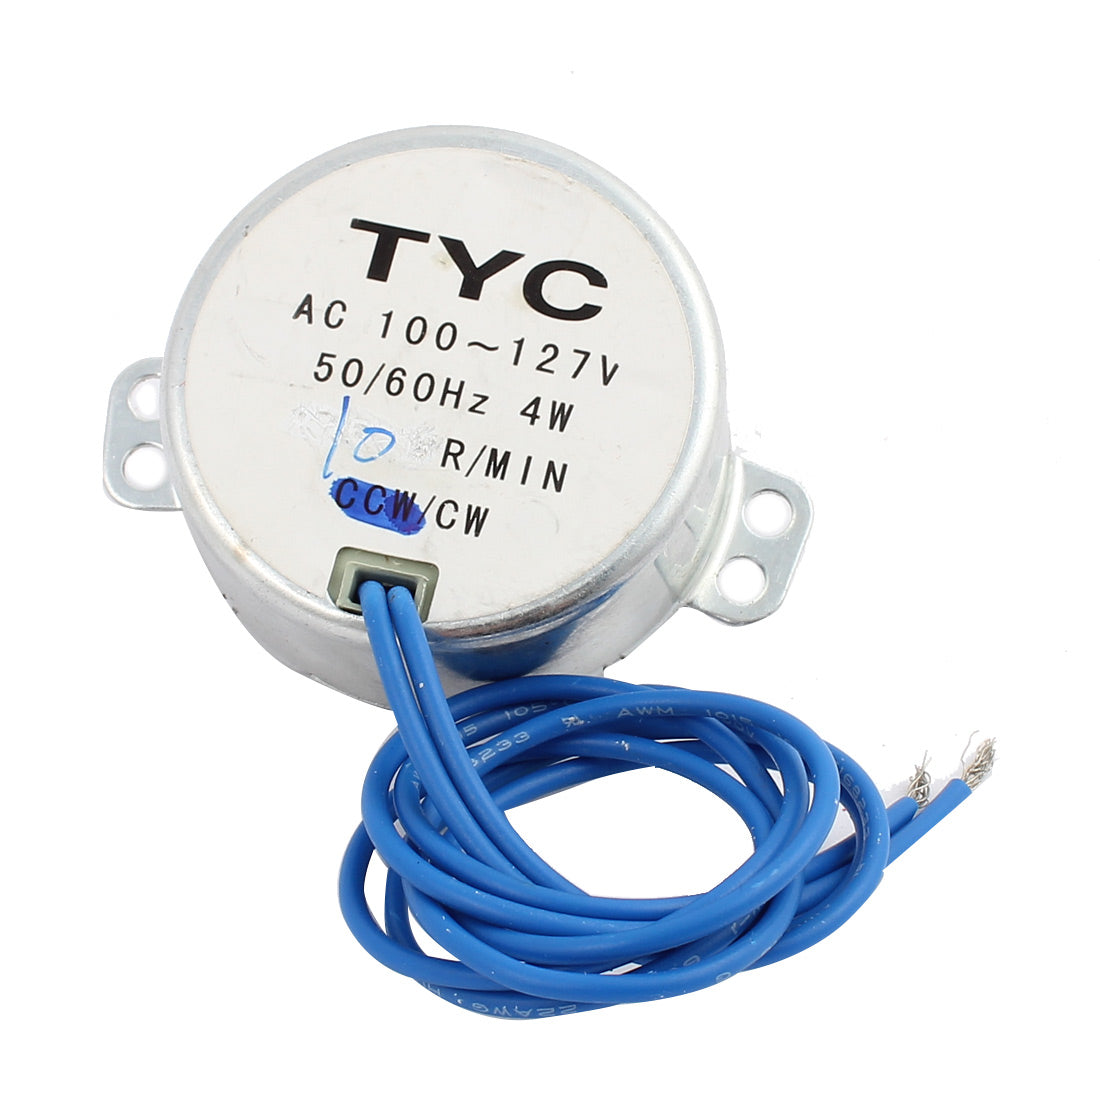 uxcell Uxcell TYC 7mm Shaft Synchronous Motor 100-127V AC 10RPM CW/CCW Torque 4W 50/60Hz